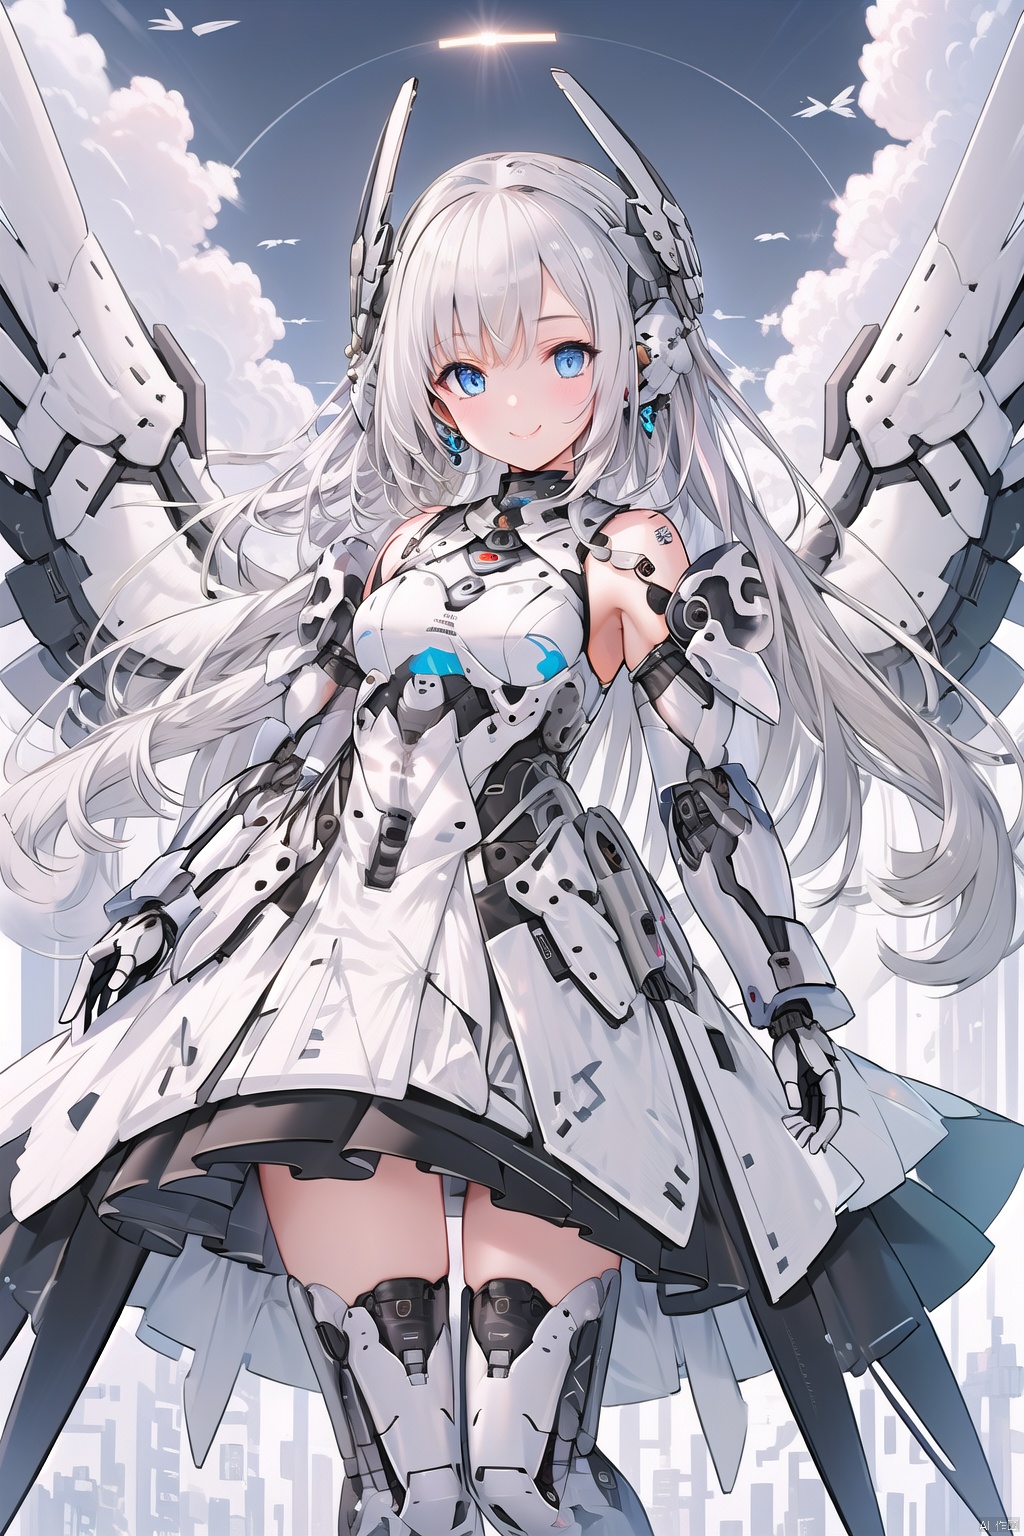  Masterpiece, best quality (illustration), cute detail face, 1 girl, solo, long_ Hair, white hair, blue eyes, dress, boots, mecha, robot joints, single robot arm, headgear, mechanical wings with vertical takeoff and landing fans, black and white dress, gray wings, mechanical wings, mechanical ears, detailed background, beautiful sunrise, orange sky, pink clouds, golden rays, hair, magic, scenery,smile, robot girl